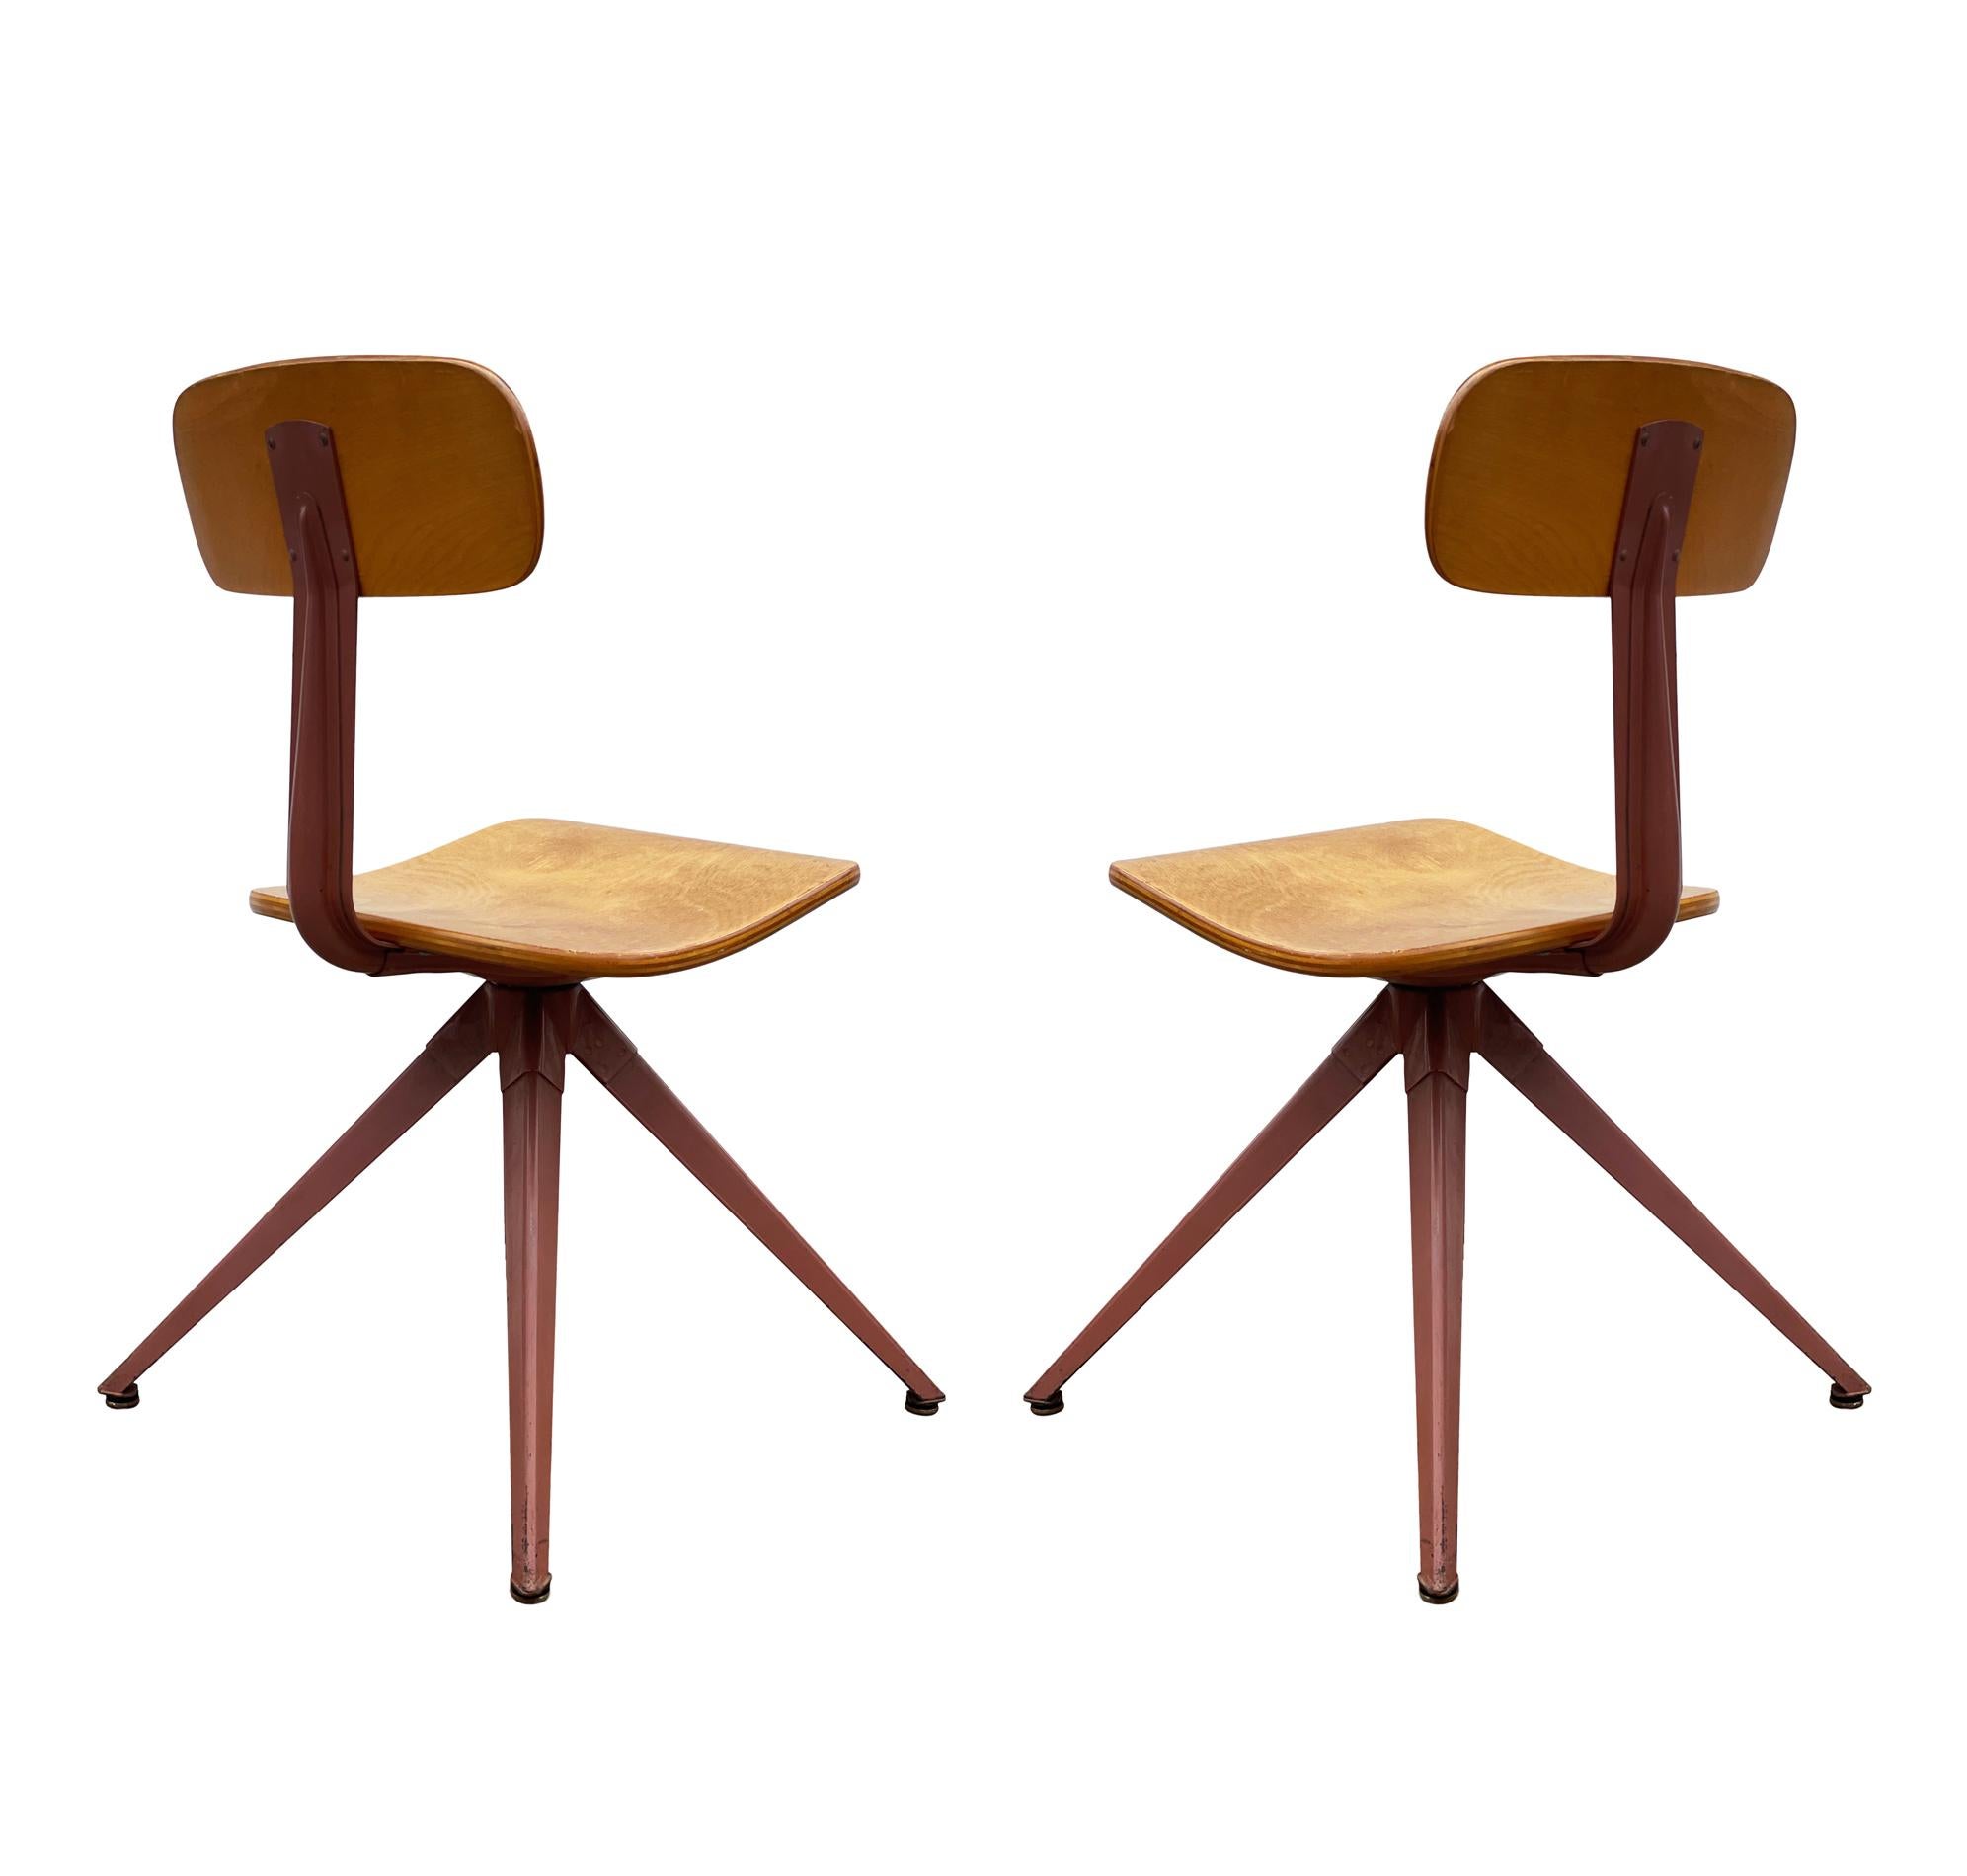 Matching Pair of Mid Century Industrial Modern Steel & Bent Wood Side Chairs For Sale 4